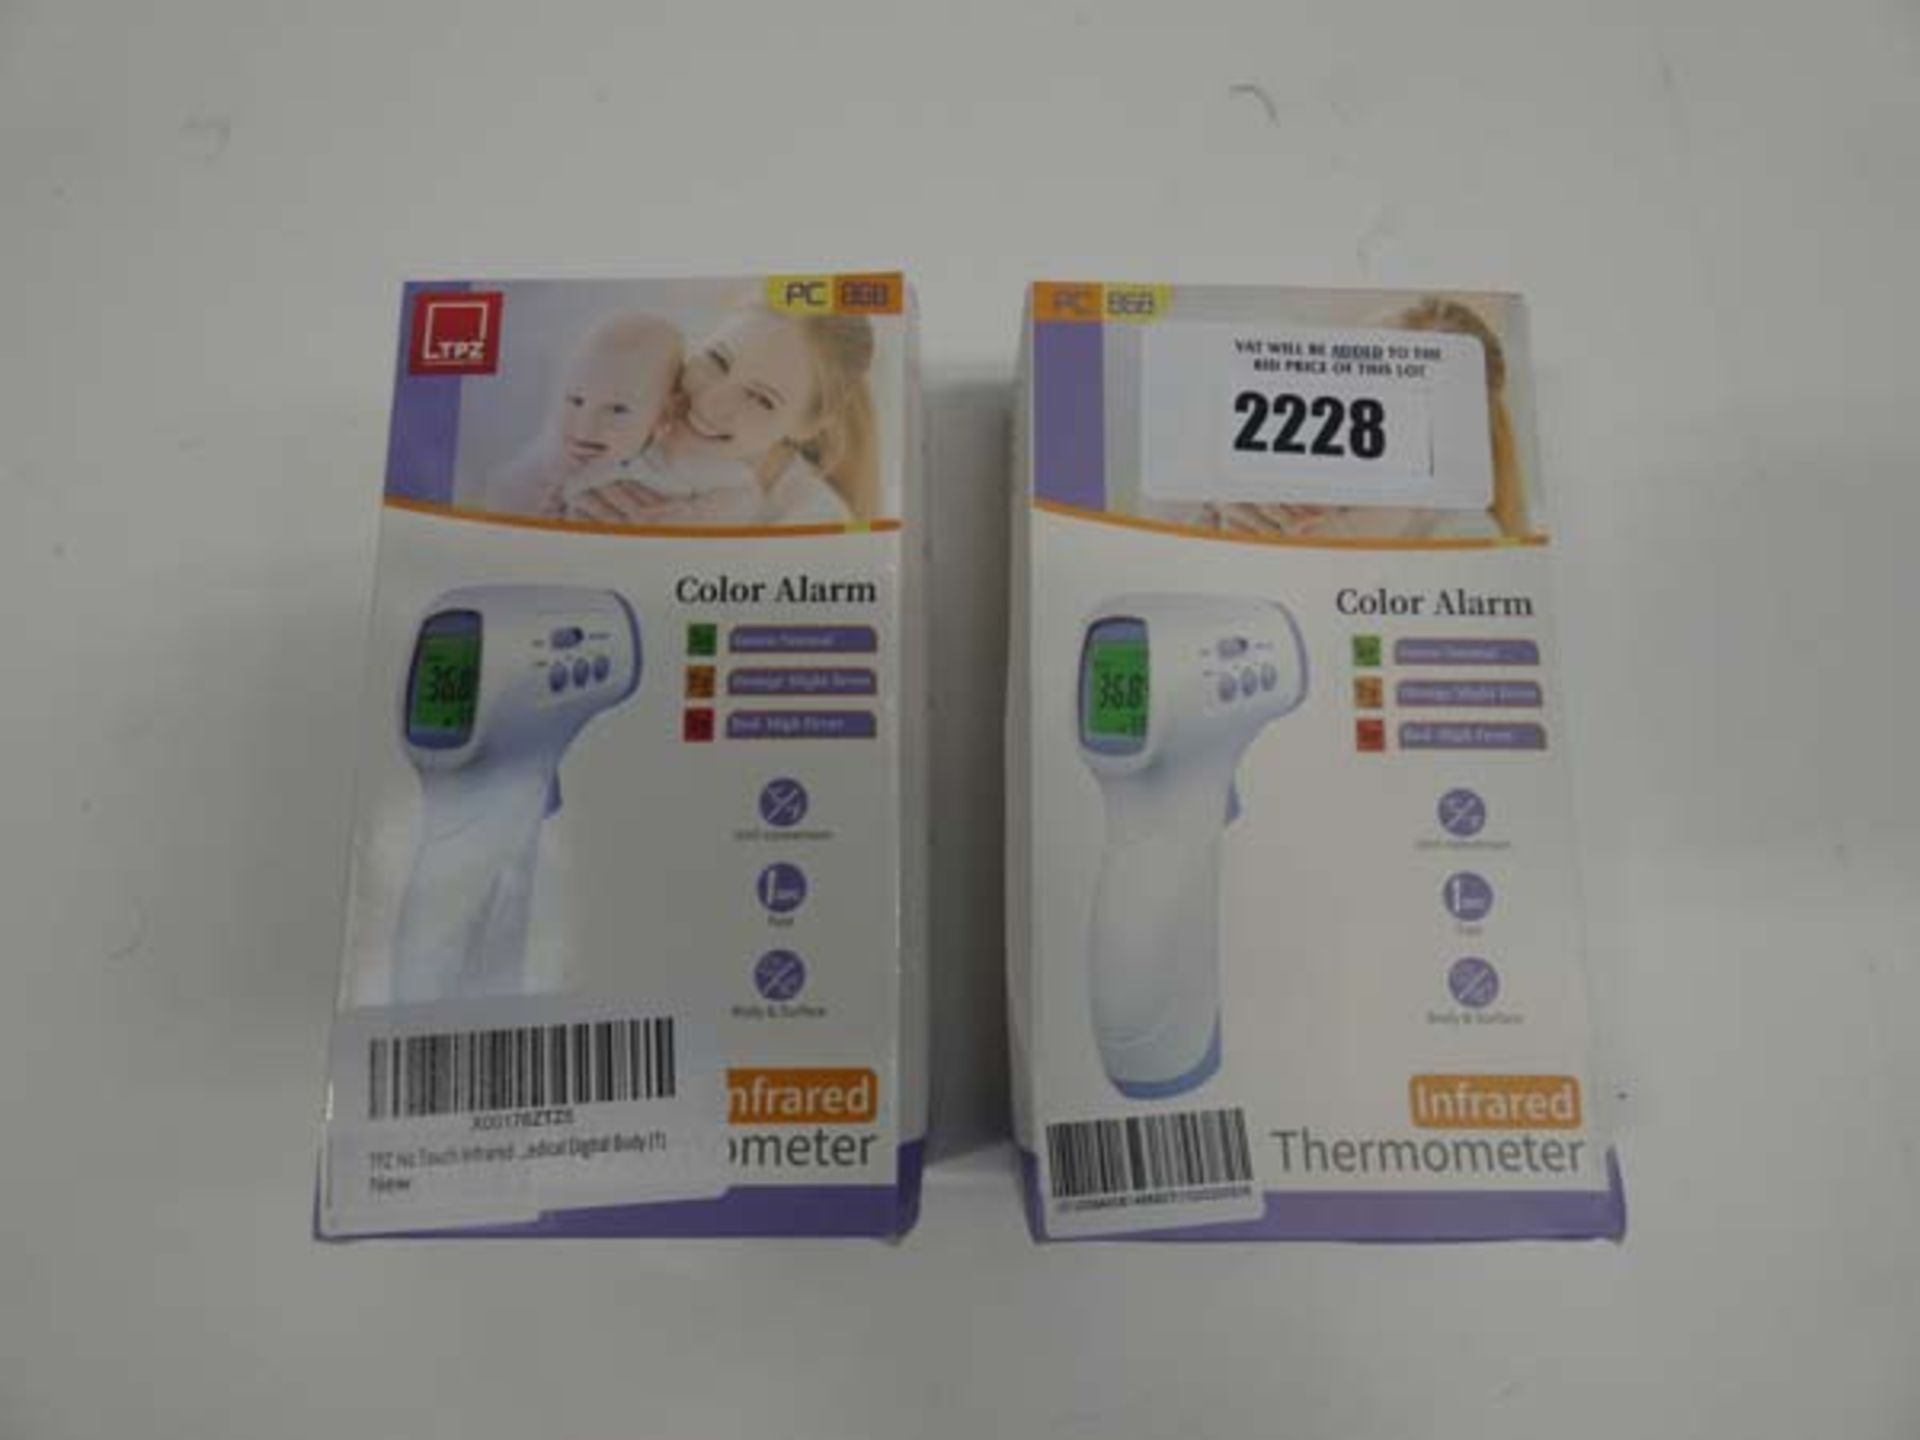 2x TPZ PC 868 infrared thermometers